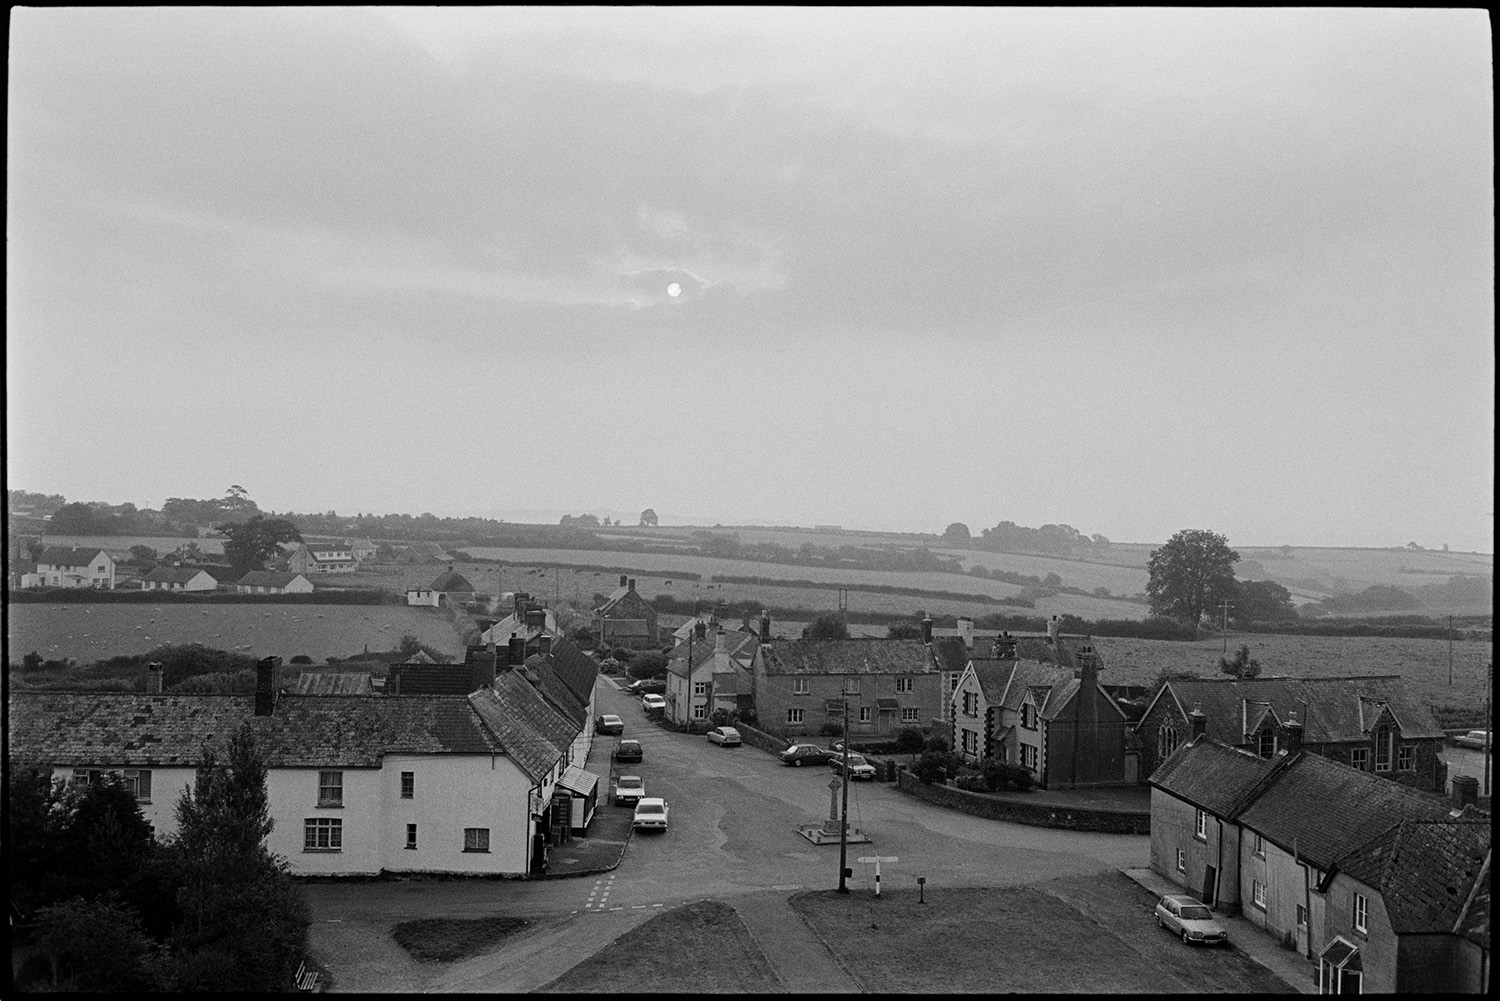 View of village from church tower, early mist. 
[A view of houses and parked cars in Ashreigney taken from Ashreigney Church tower in the early morning. The war memorial can be see in the village square and misty fields with grazing livestock are visible in the background.]